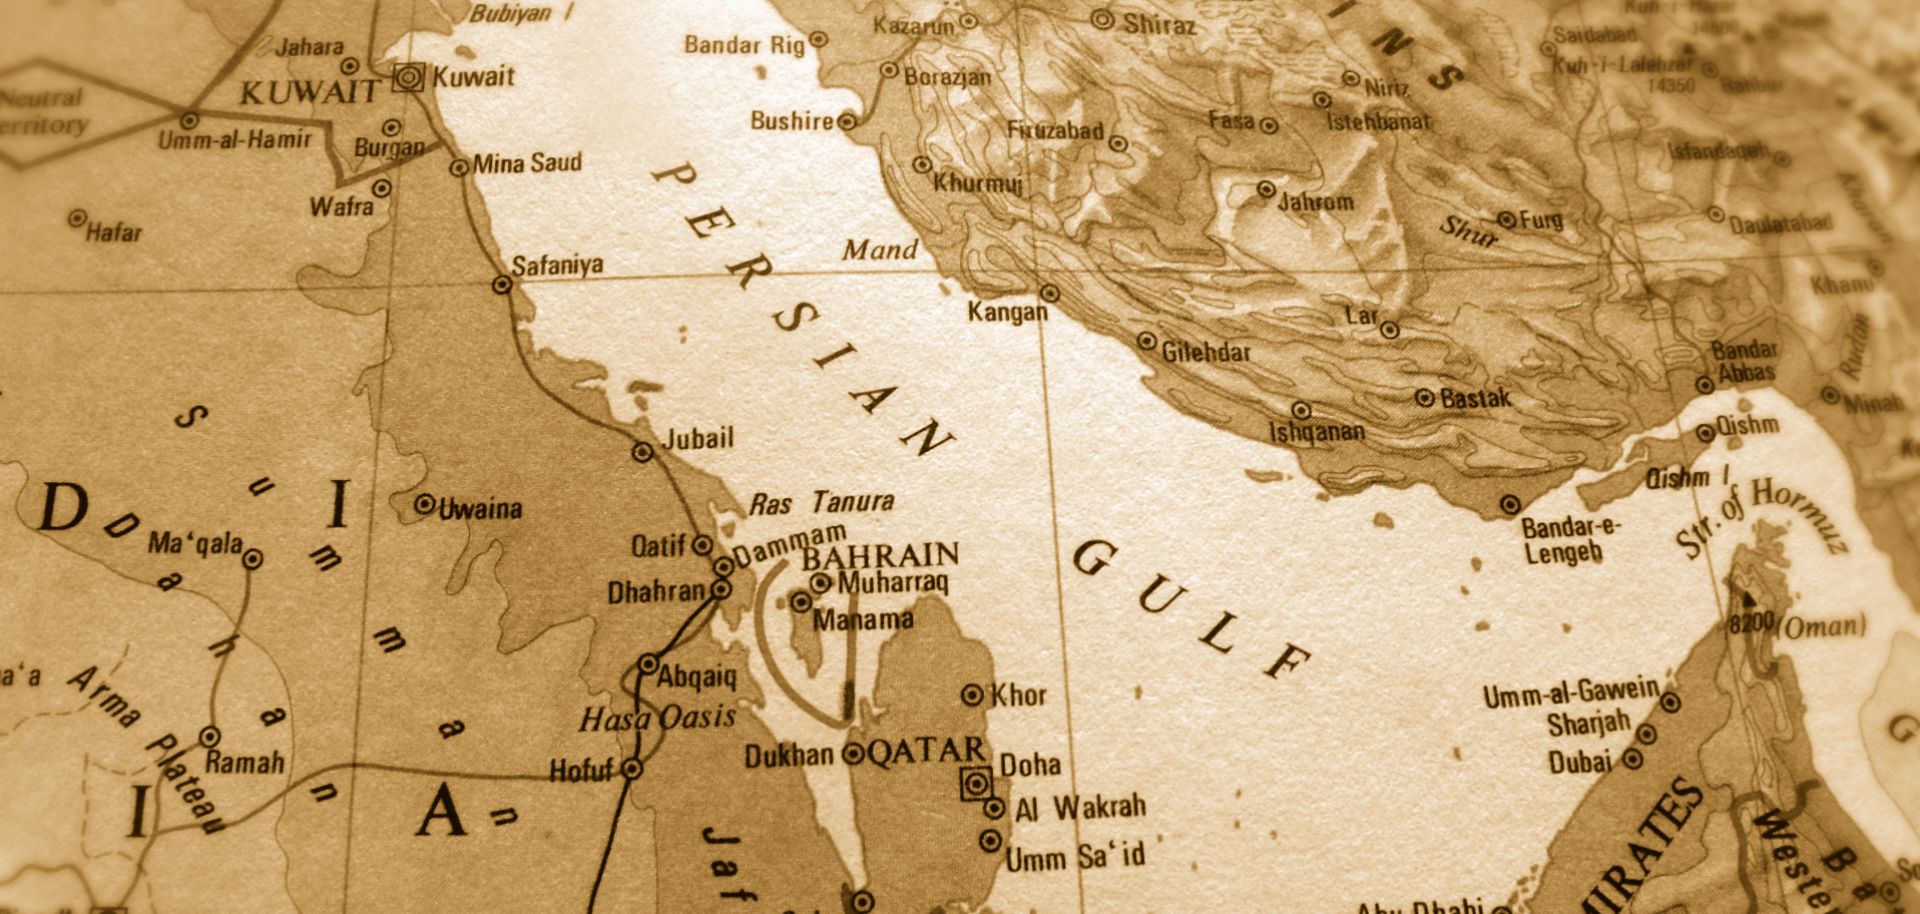 A map of the Persian Gulf region.